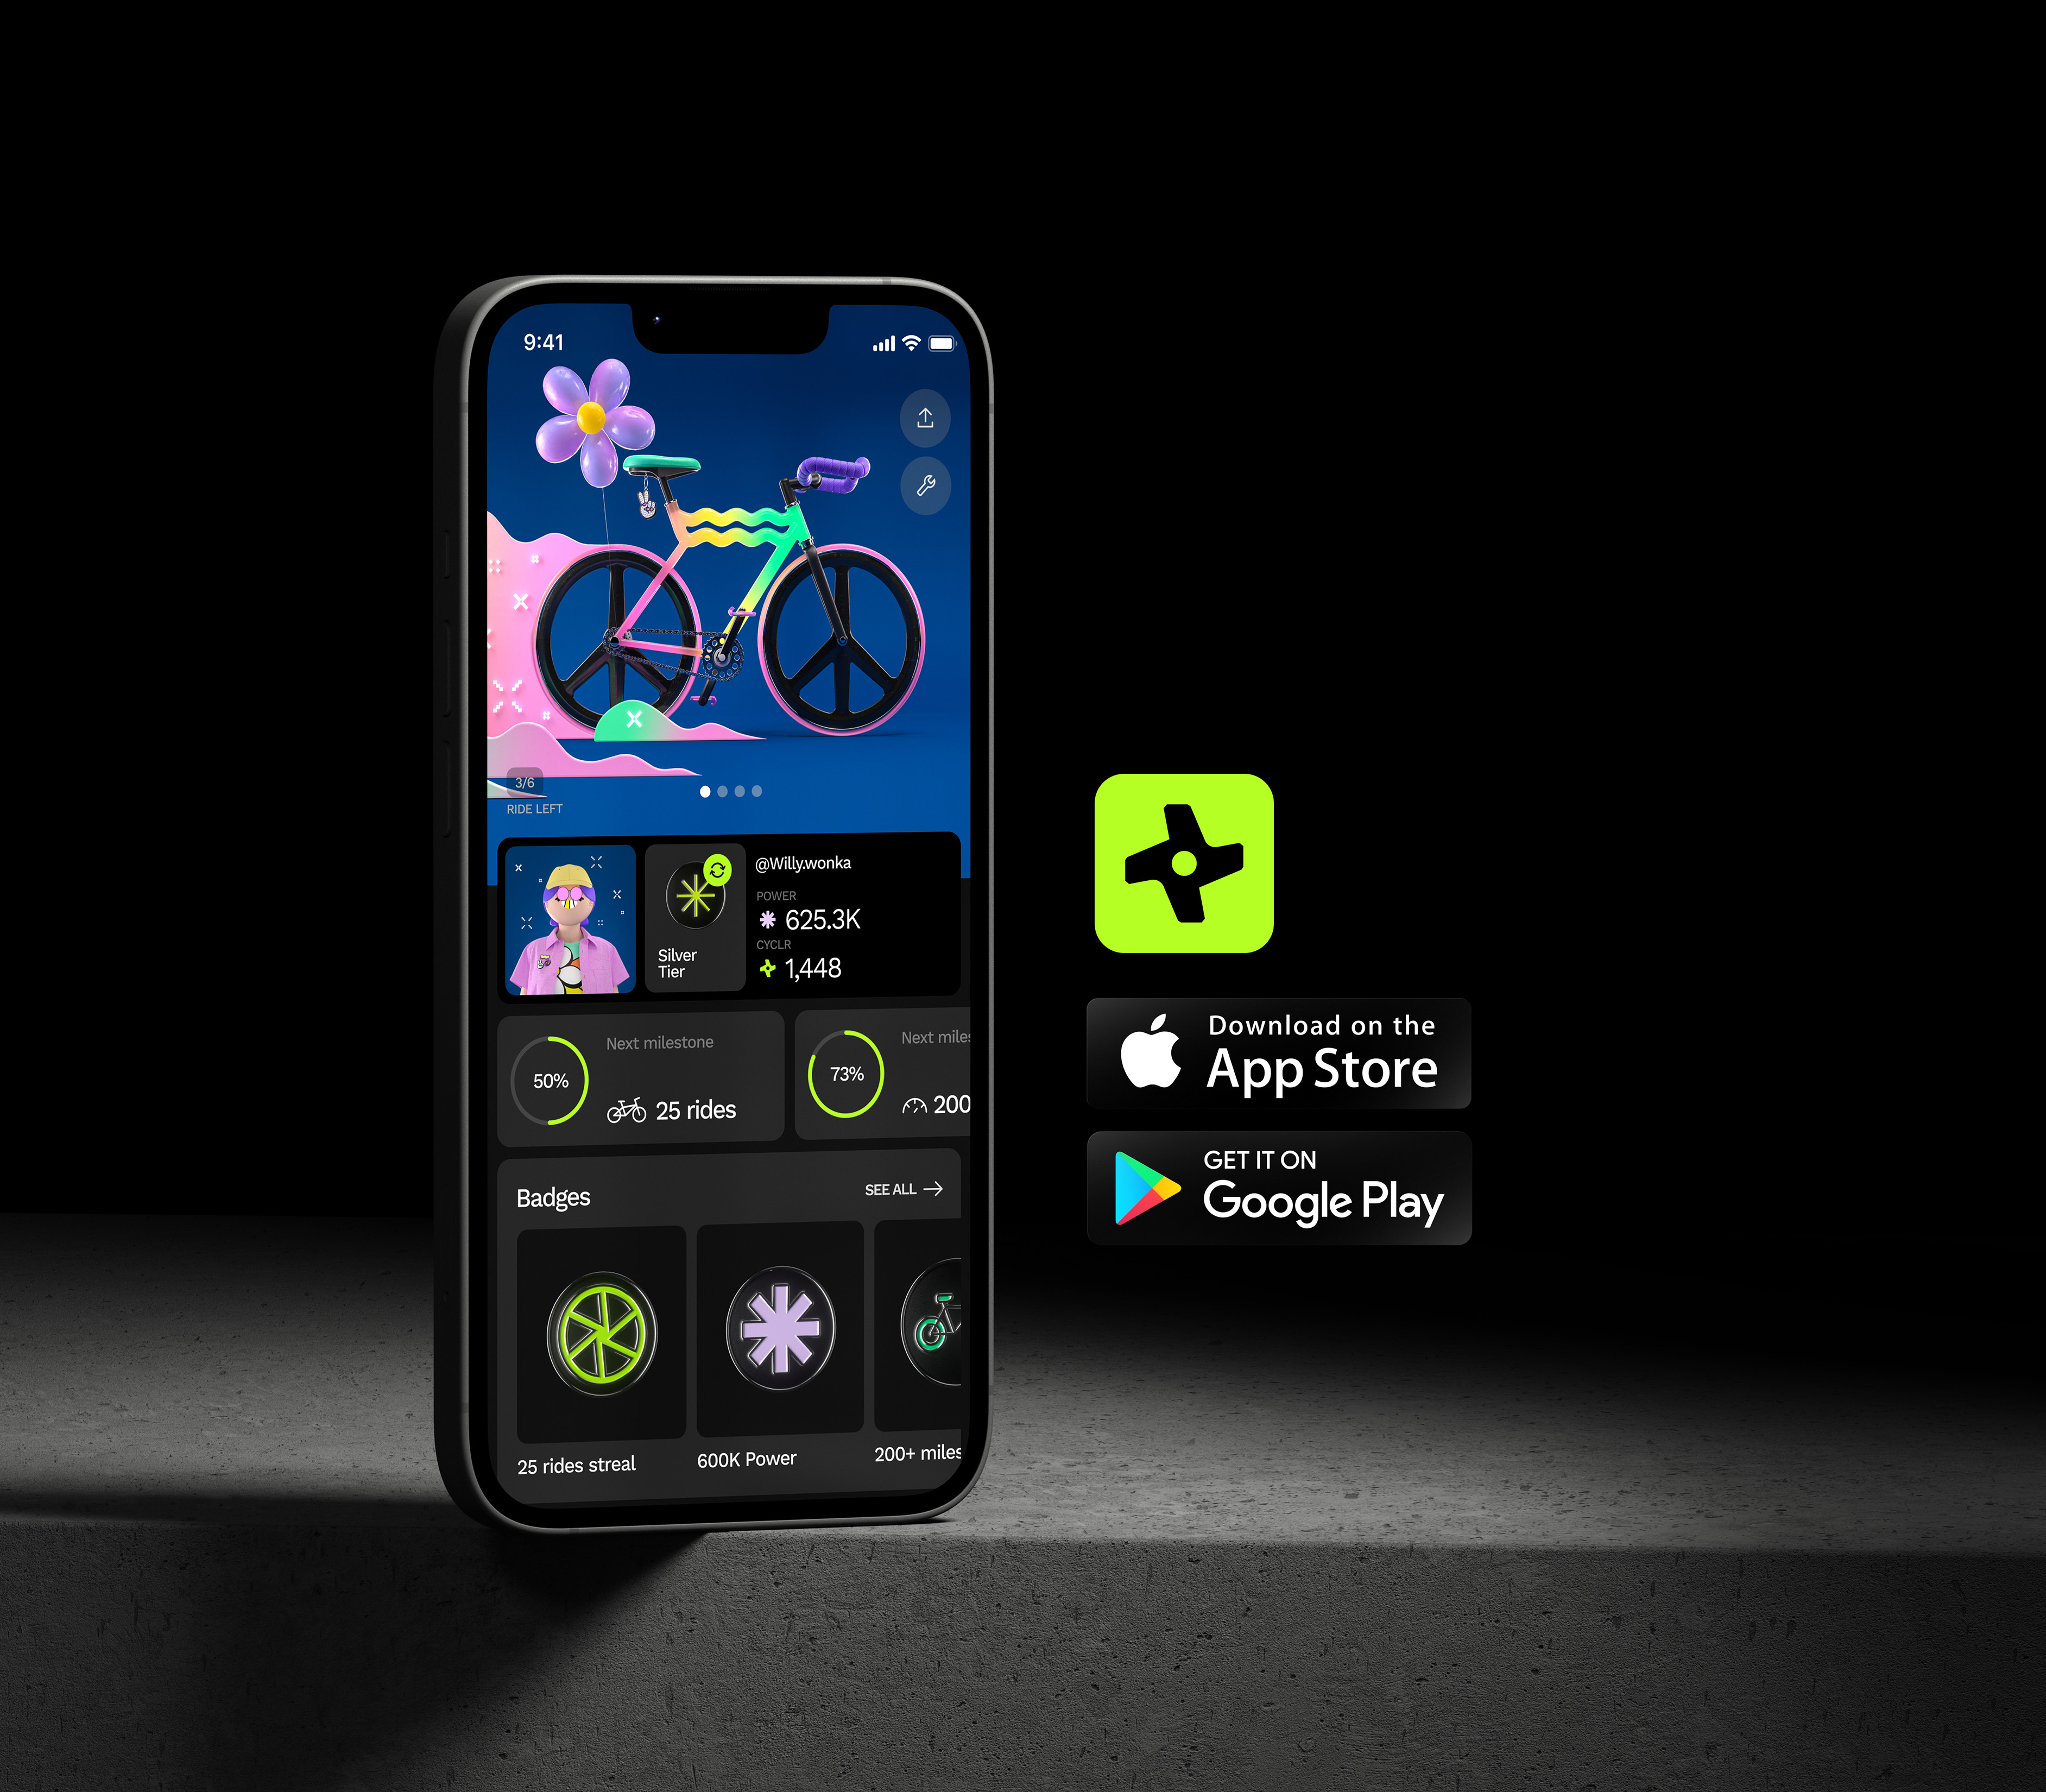 Next-Generation Fitness App W3:Ride Will Pay Users to Be Active and Convert Biking Energy to Real-Life Rewards thumbnail